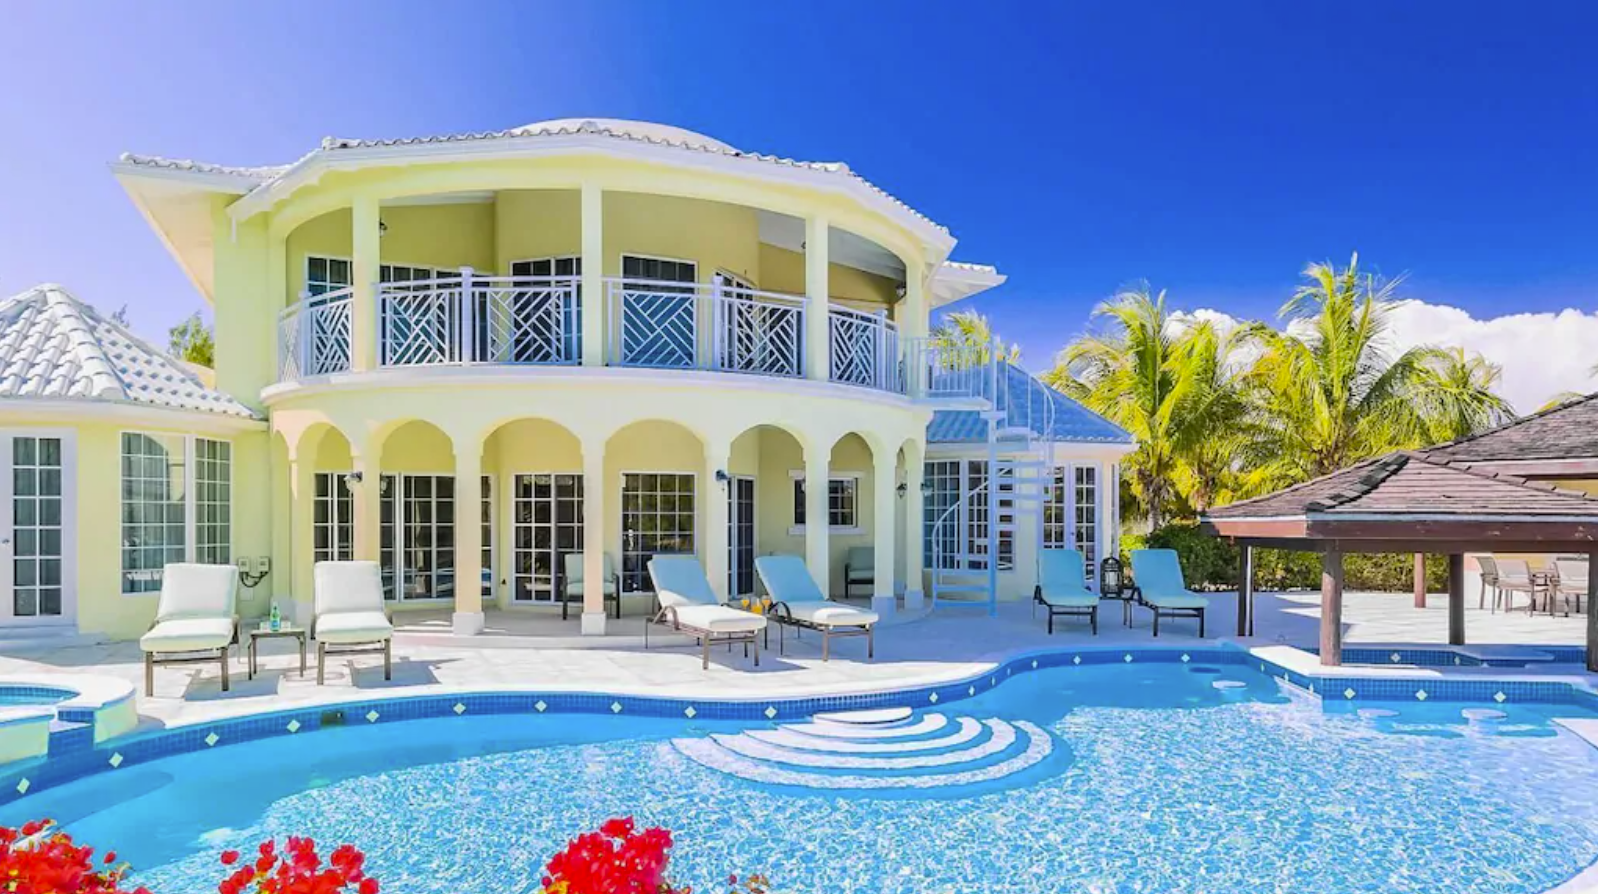 An exterior image of a stunning two-story Turks and Caicos villa. The exterior of the home is a quaint yellow with white roofing and trim, a second story balcony, and covered porch. The private patio has a large pool and shaded and unshaded sunning areas.